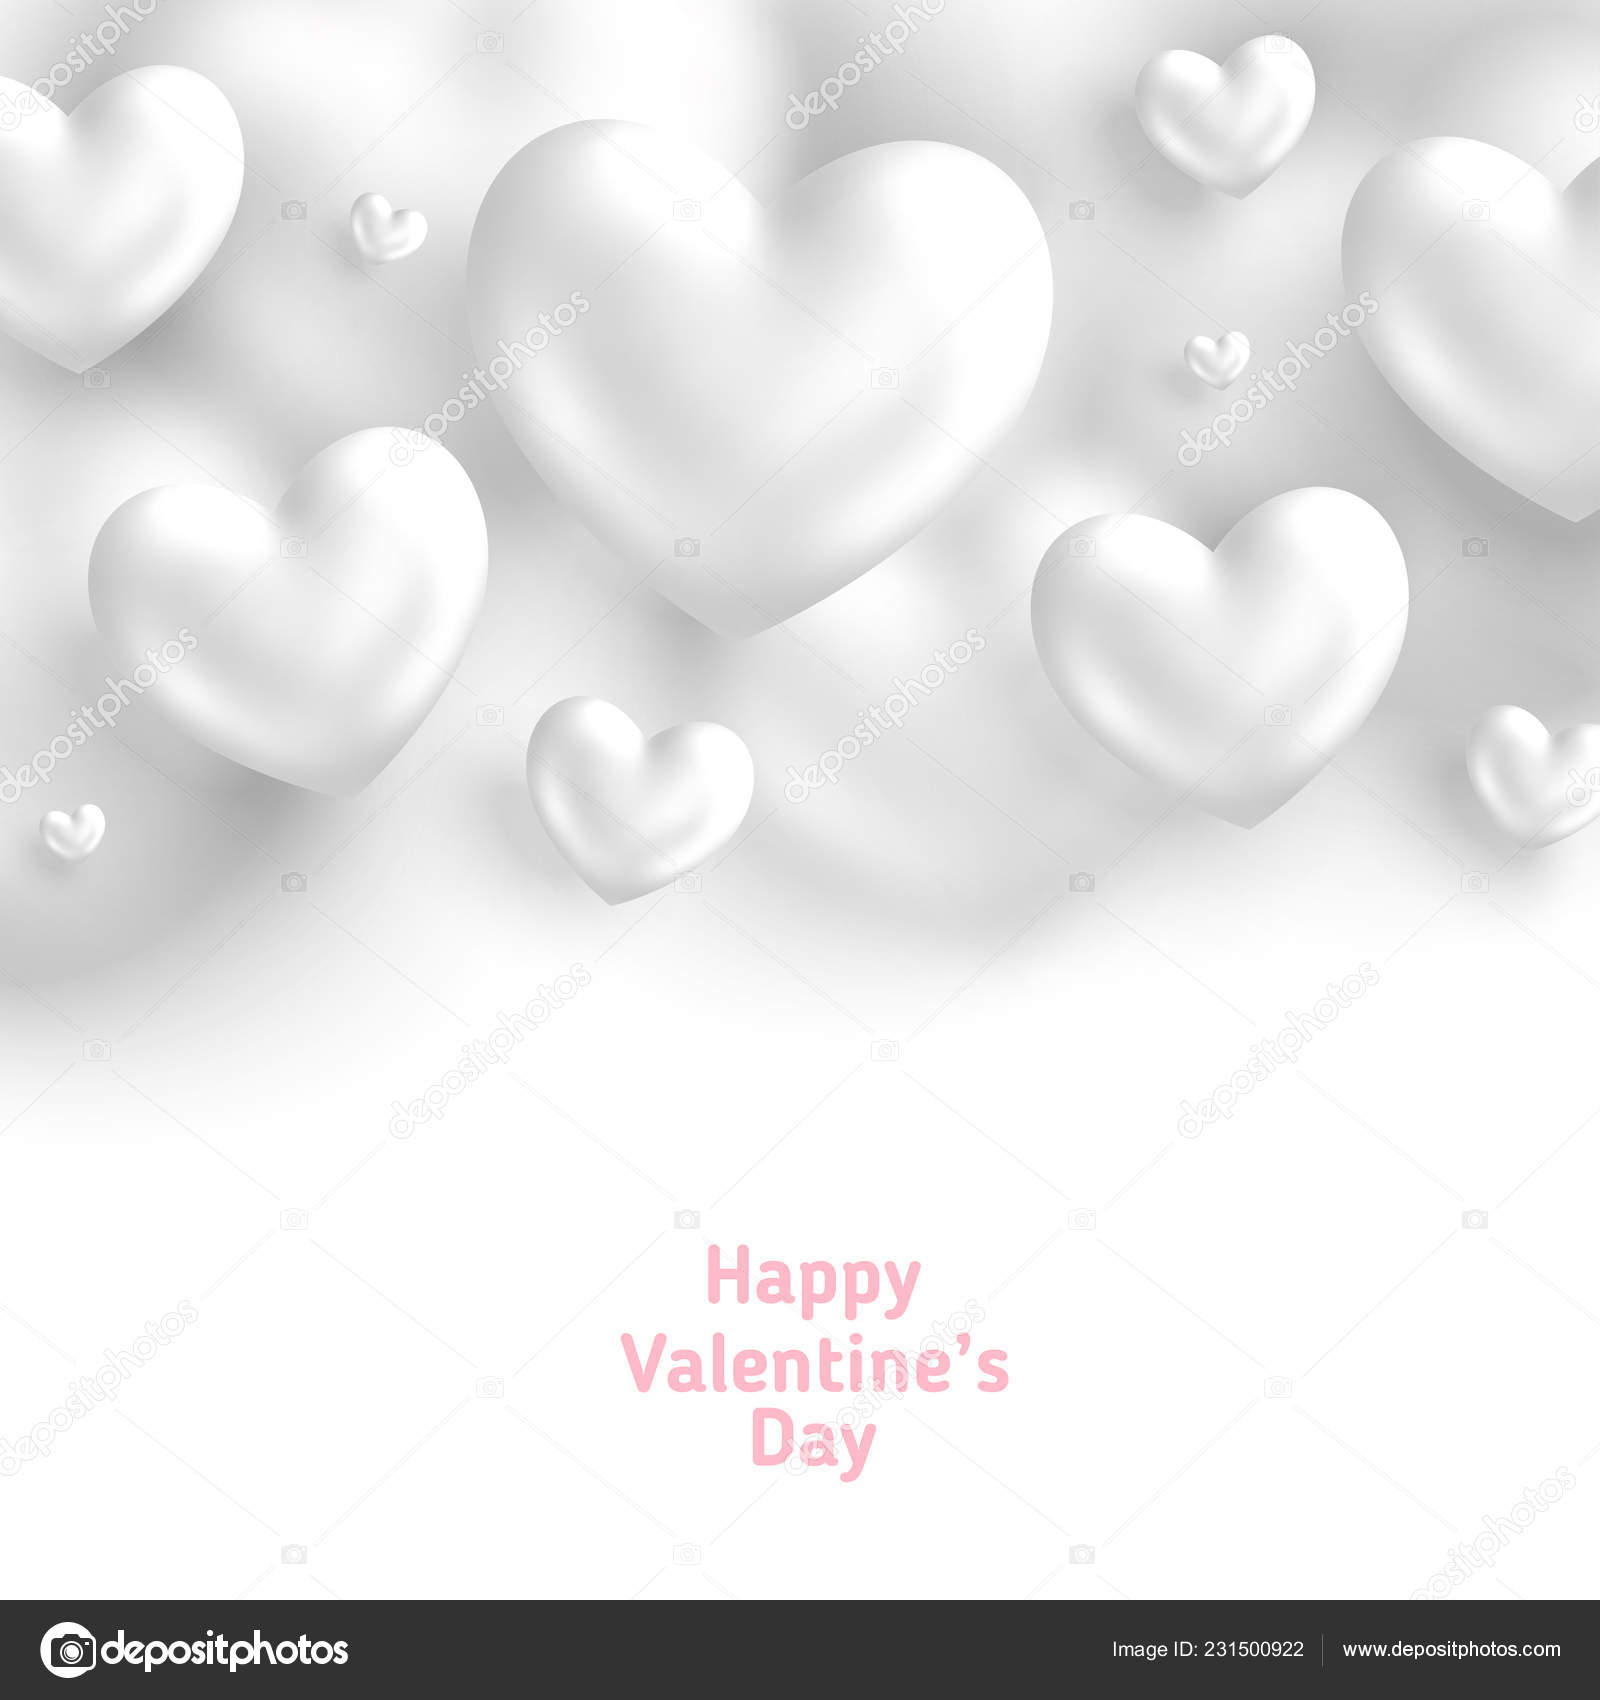 White Hearts For Valentines Day Vector Image By C Kotoffei Vector Stock